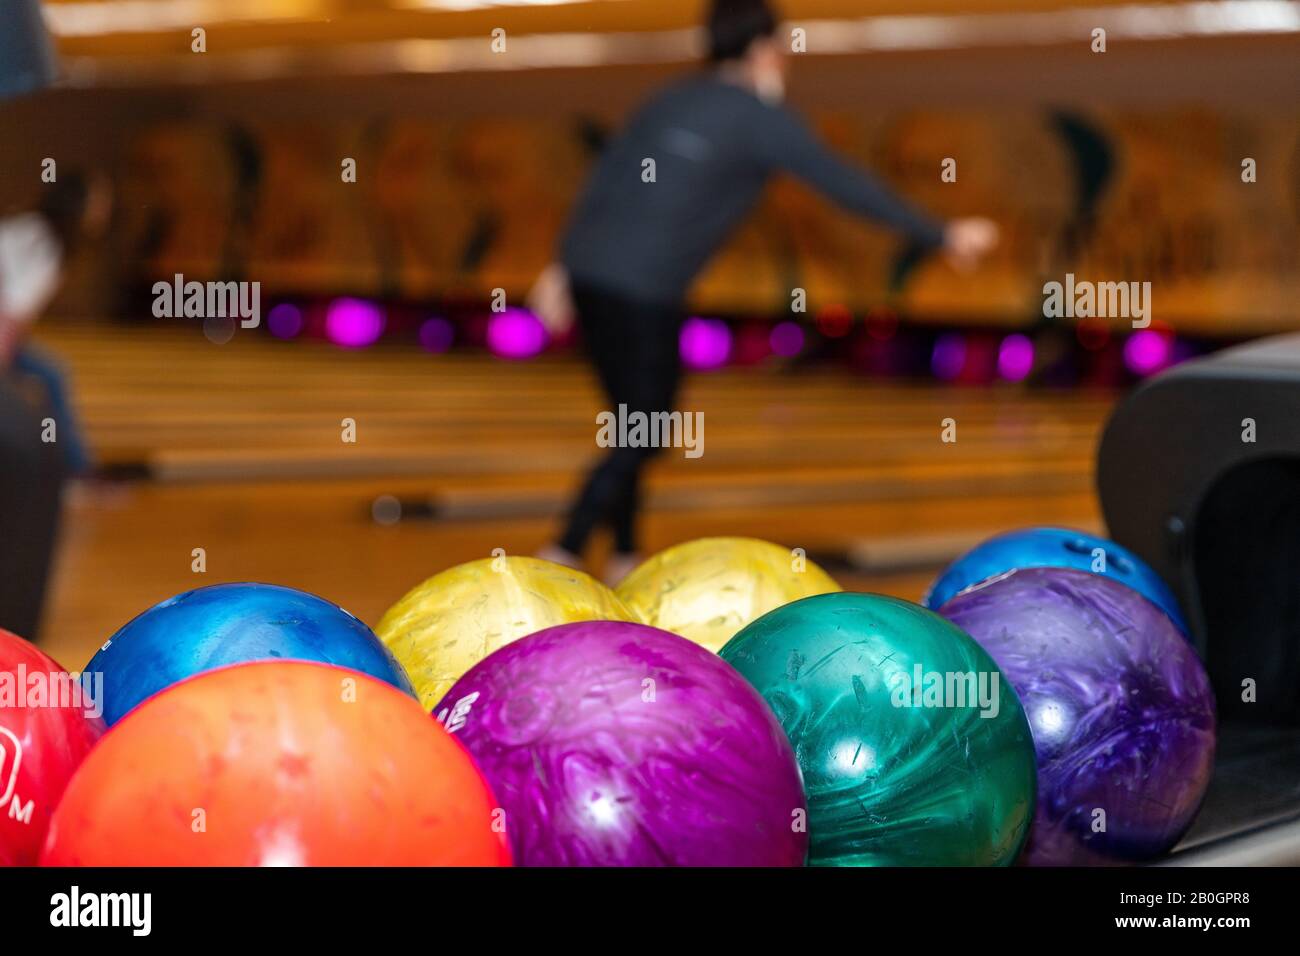 Colorful and vibrant bowling balls, with lanes in the background, with copy space Stock Photo